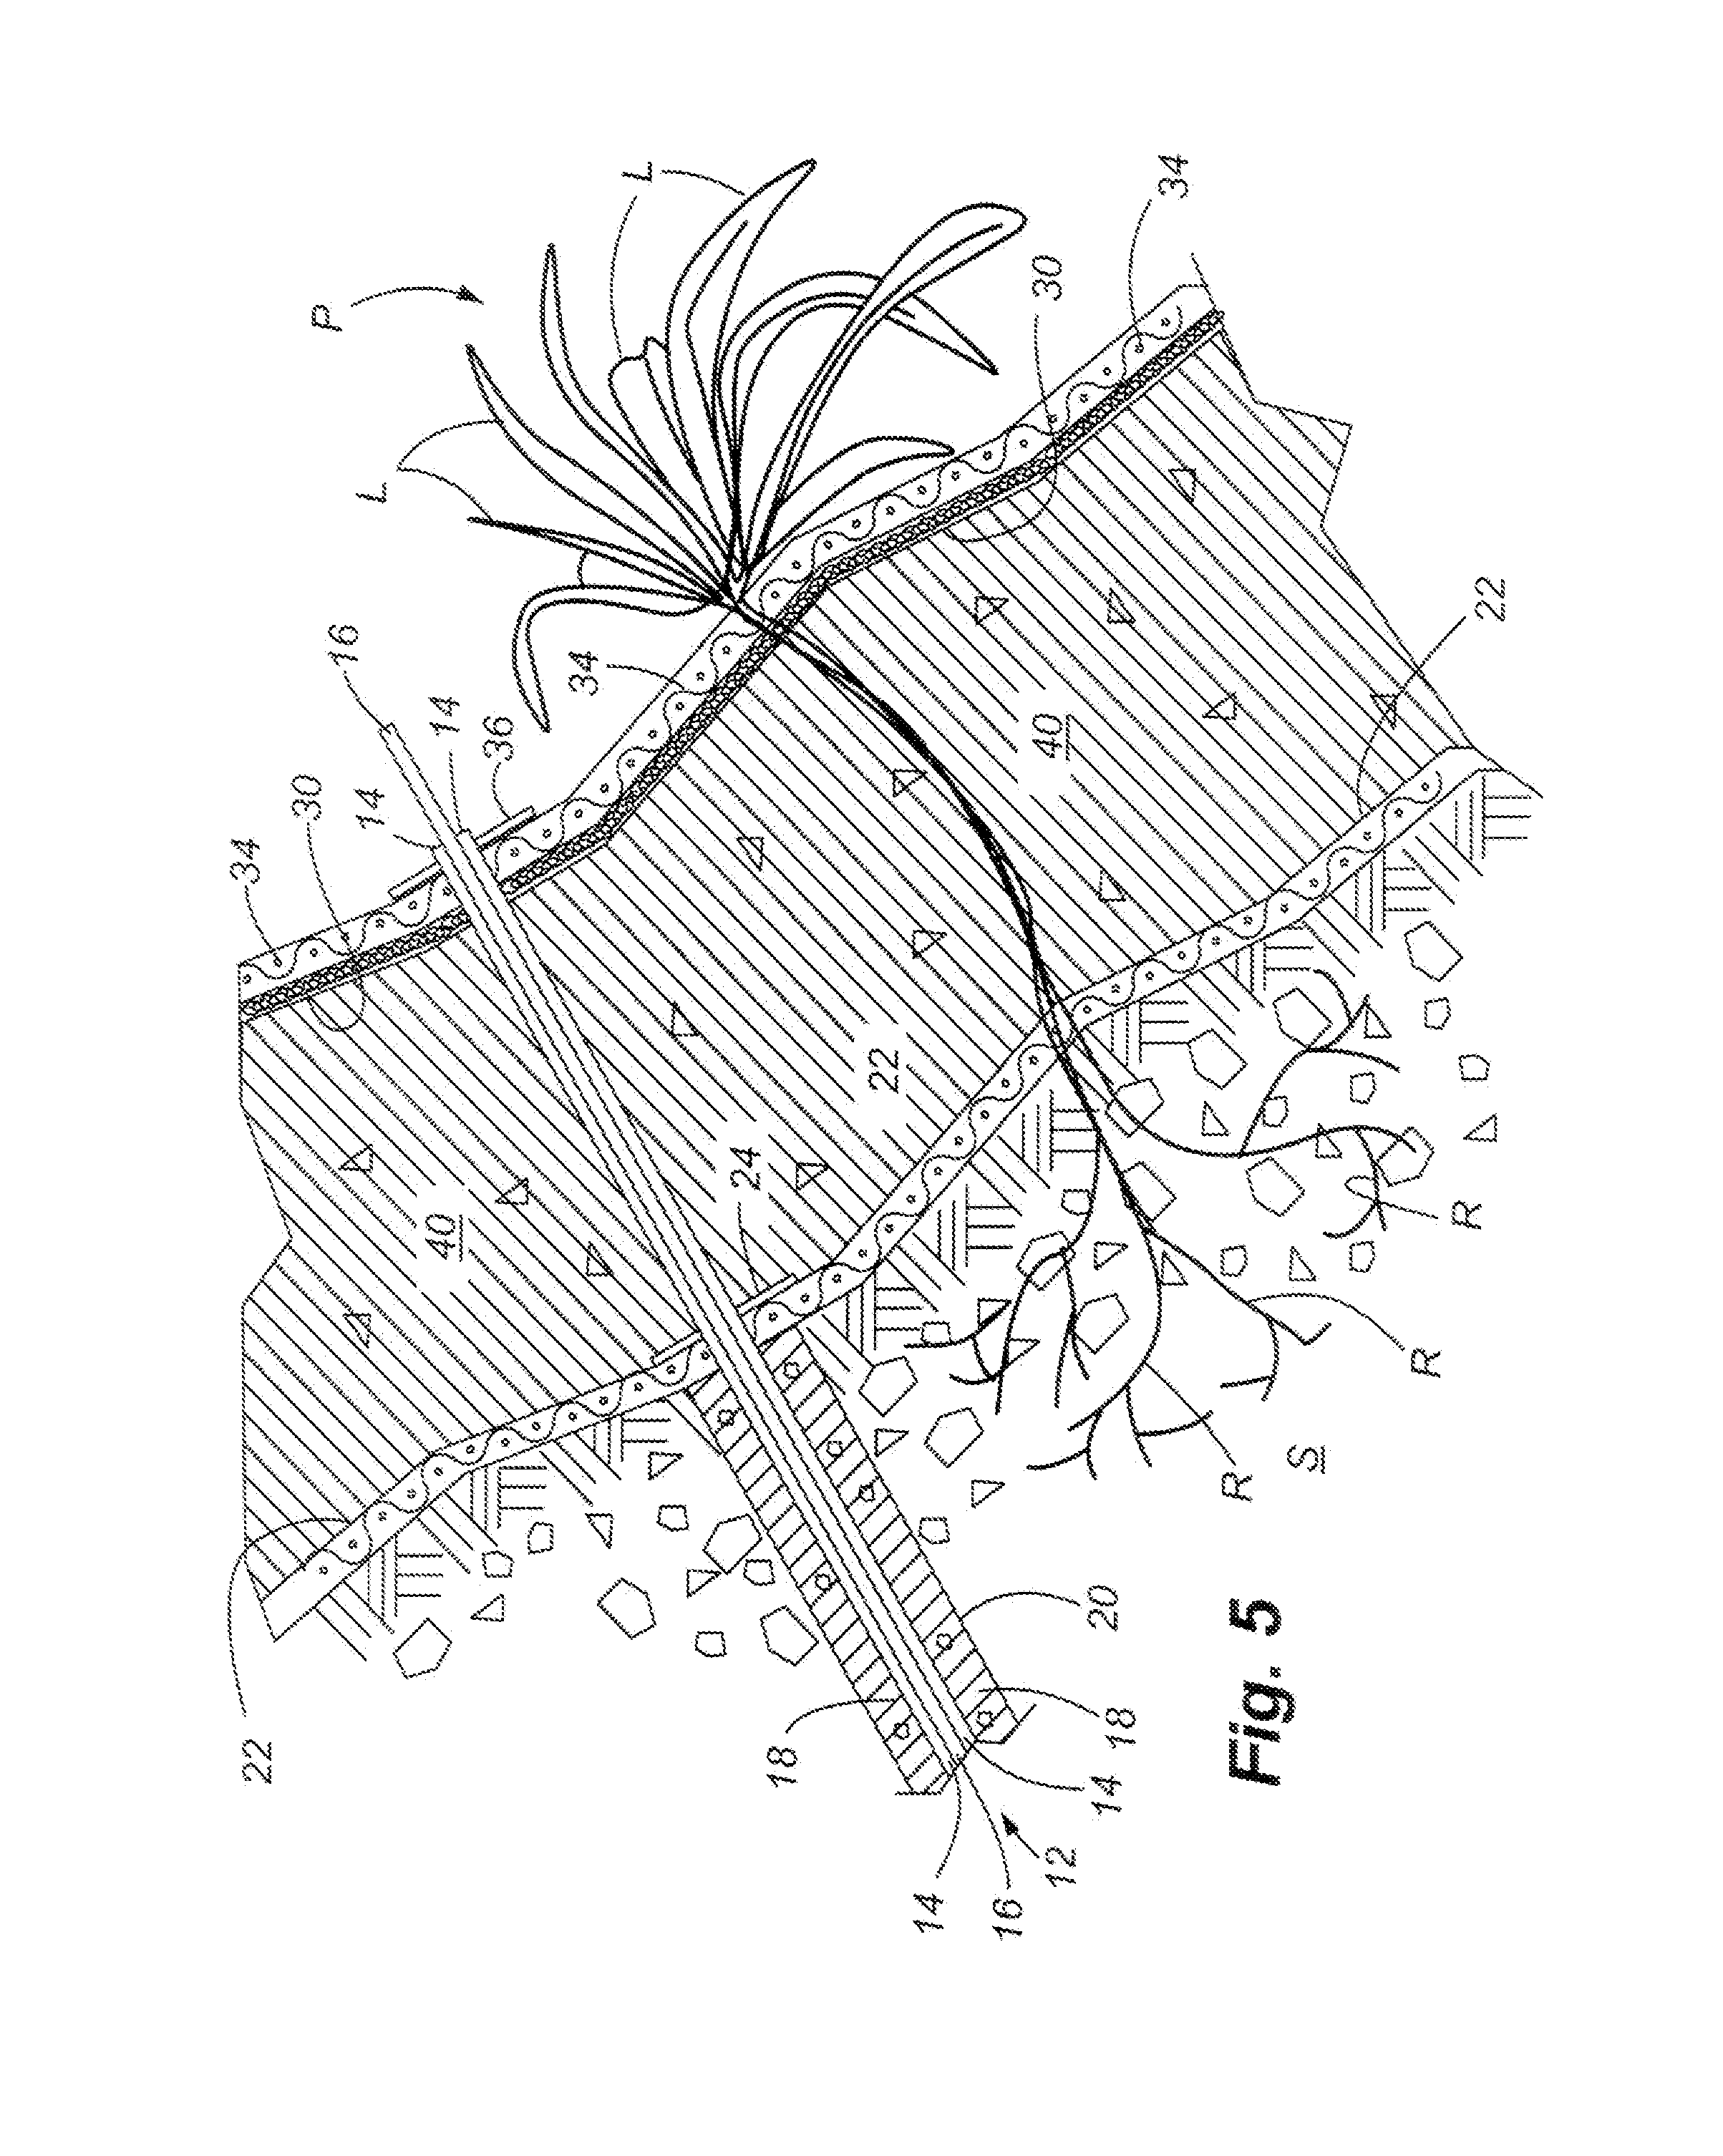 System and method for soil stabilization of sloping surface